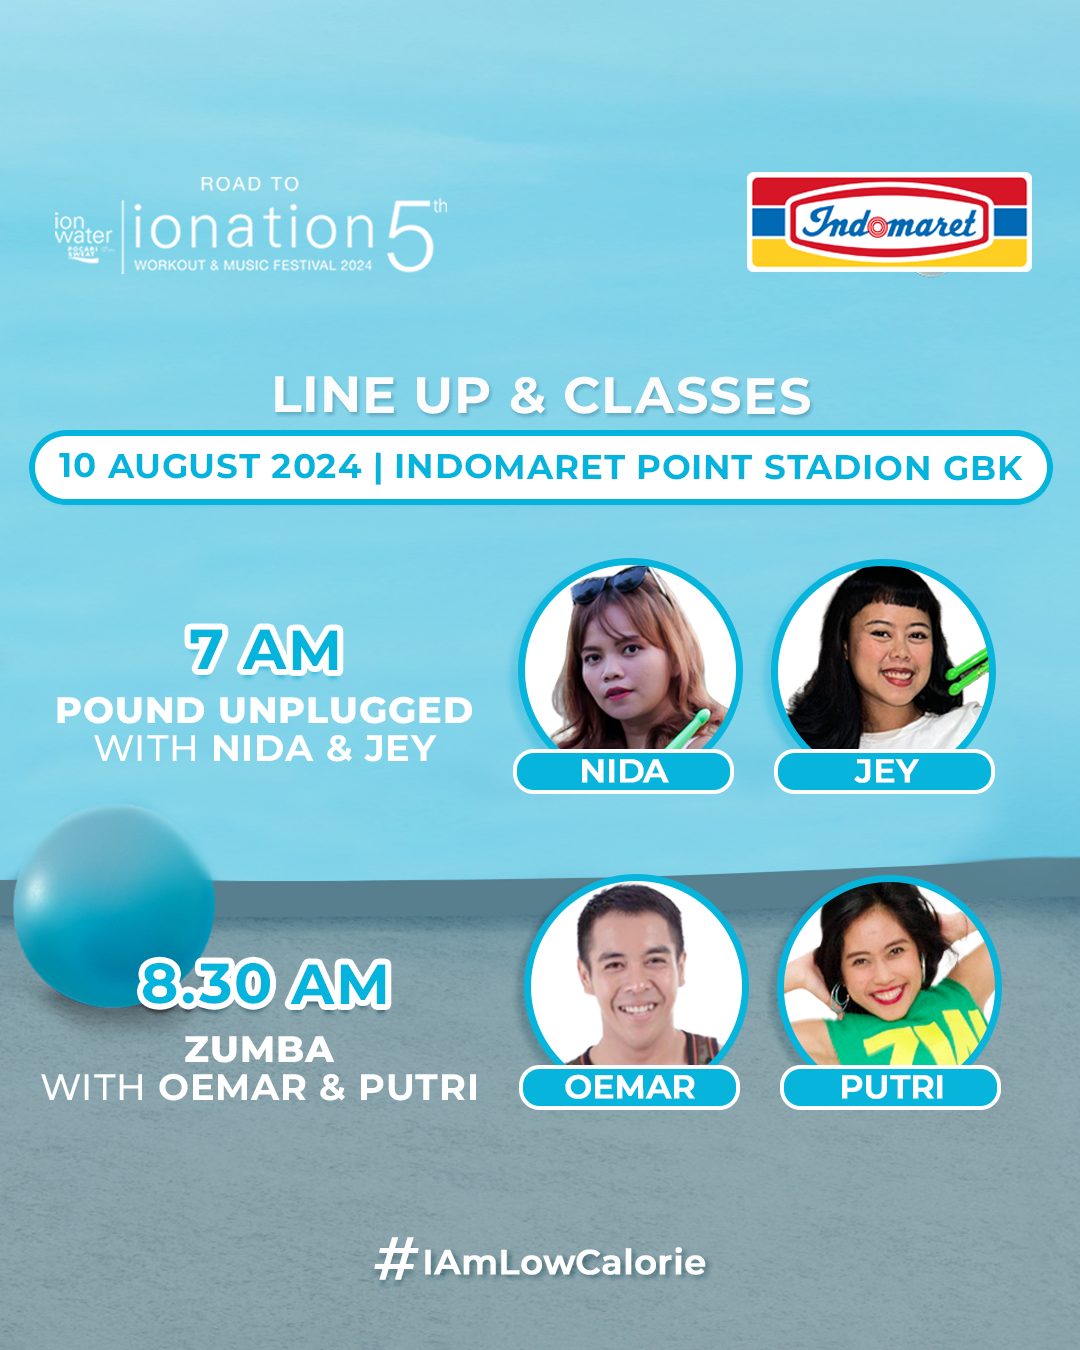 ROAD TO IONATION X INDOMARET POUND UNPLUGGED WITH NIDYA & JEY 10 AGUSTUS 2024